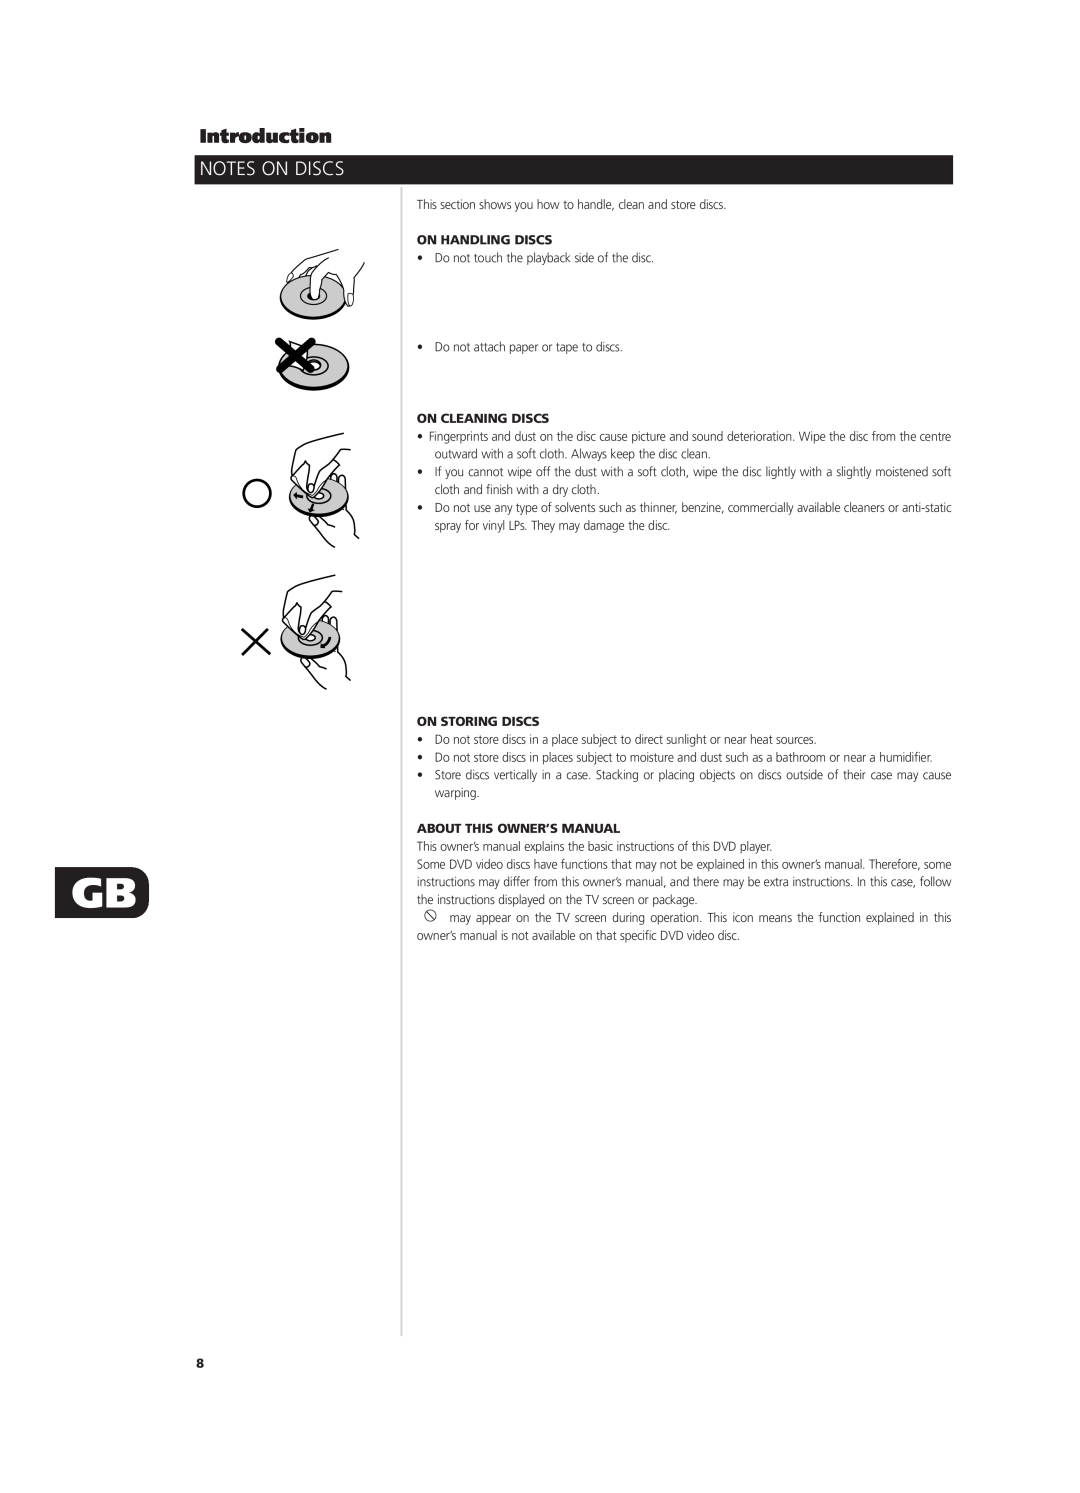 NAD T531 owner manual Notes On Discs, On Handling Discs, On Cleaning Discs, On Storing Discs, Introduction 